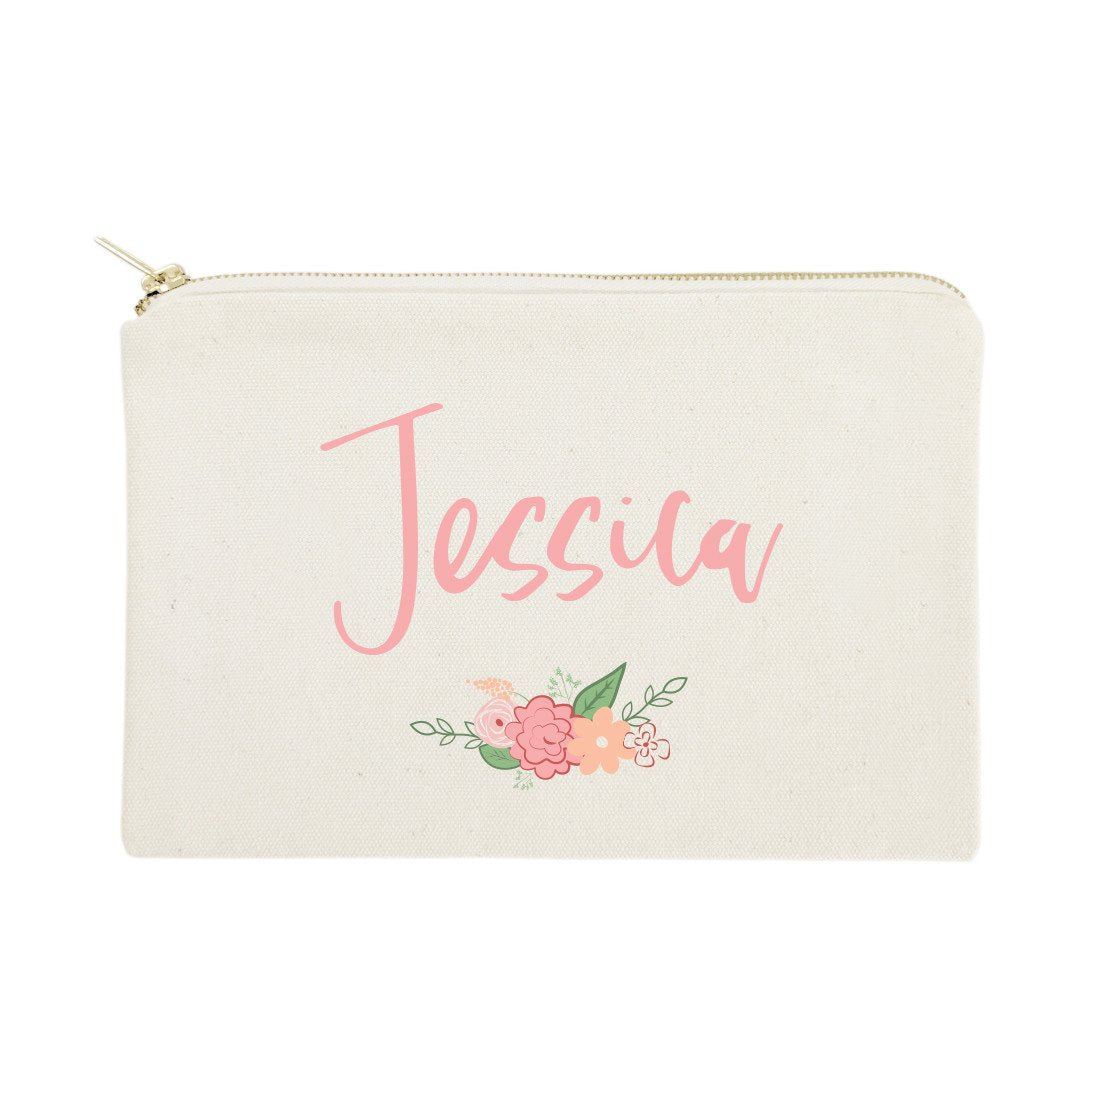 Jessica Name Personalized Floral Pink Black Women Girls Gift Tote Bag